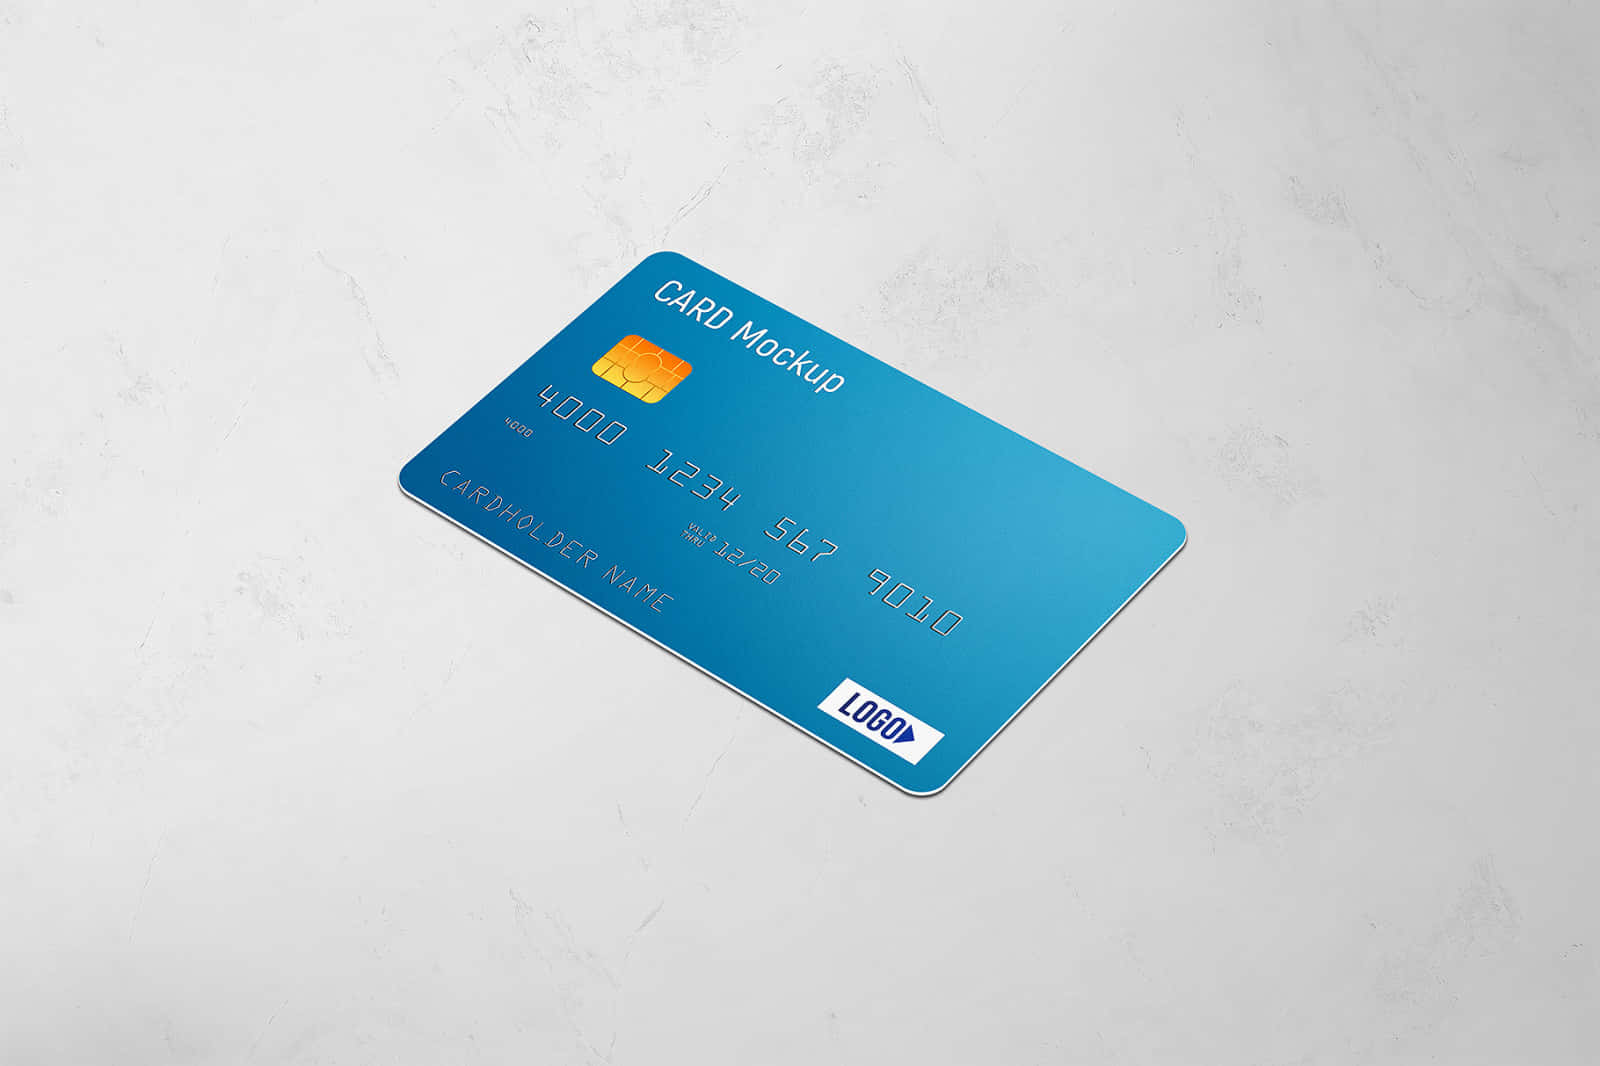 A golden credit card ready to be used.